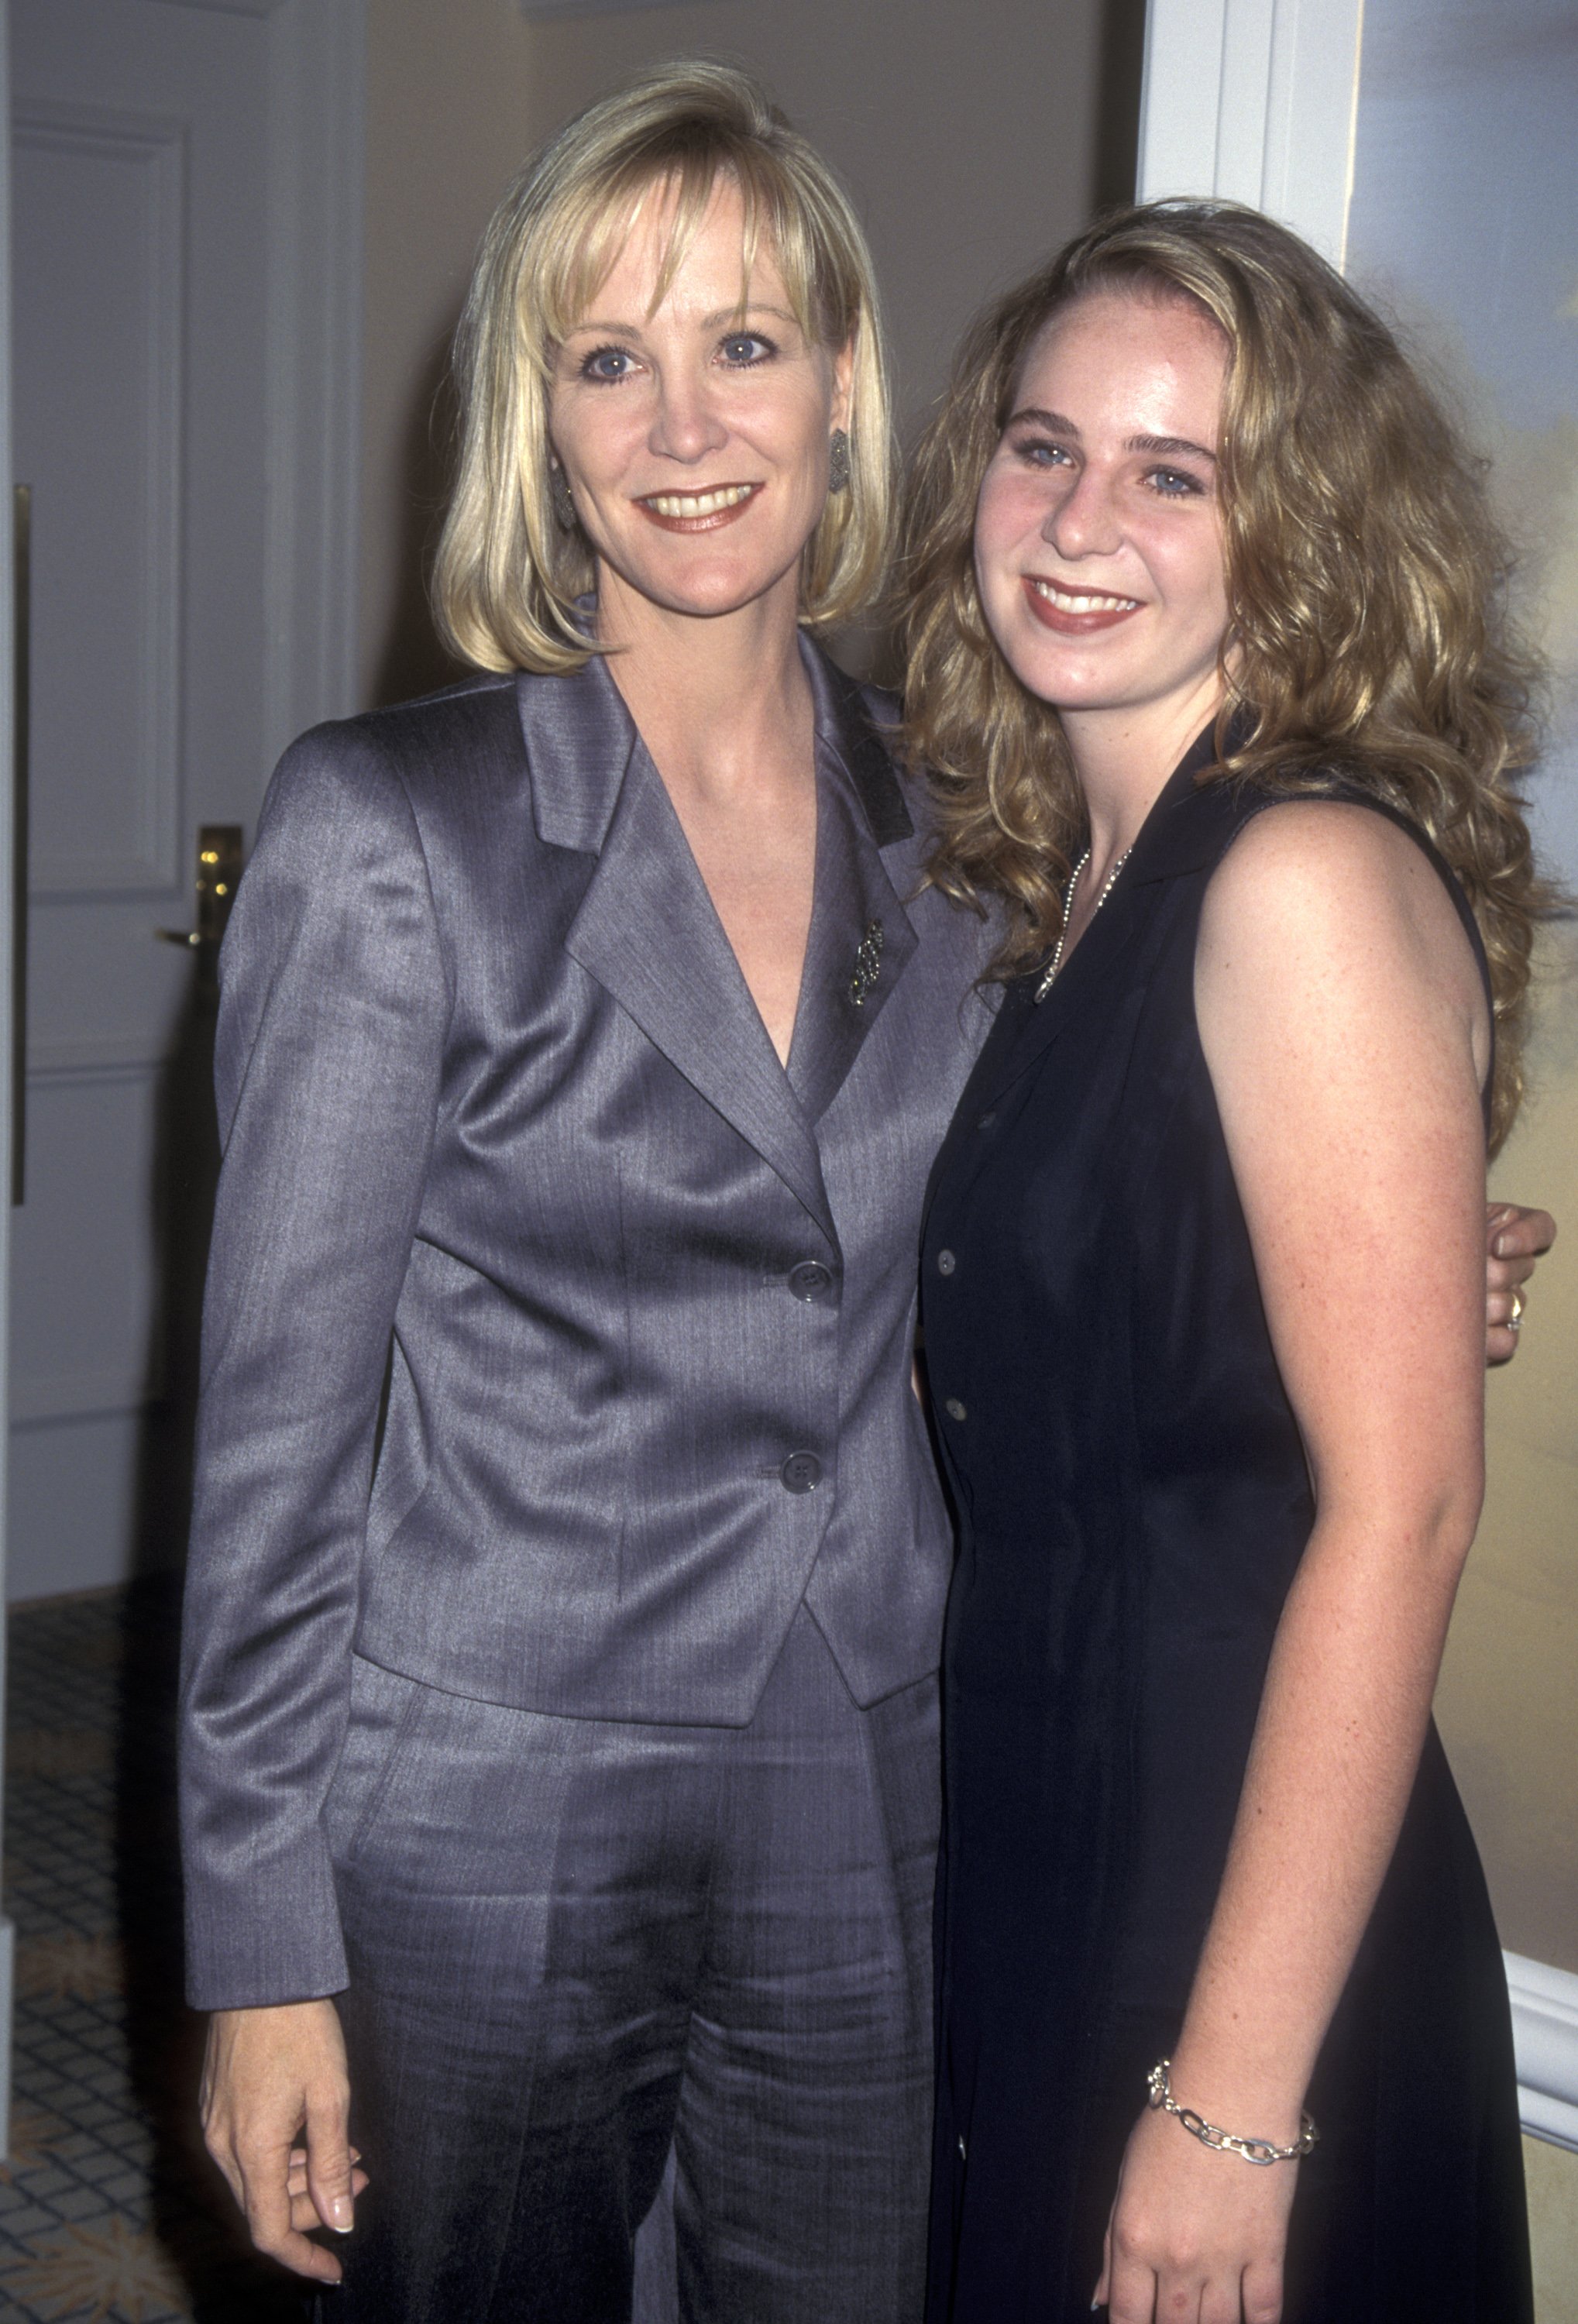 Joanna and Ashley Kerns at the Second Annual Women in Film Lucy Awards on September 9, 1995, in Beverly Hills, California | Source: Getty Images